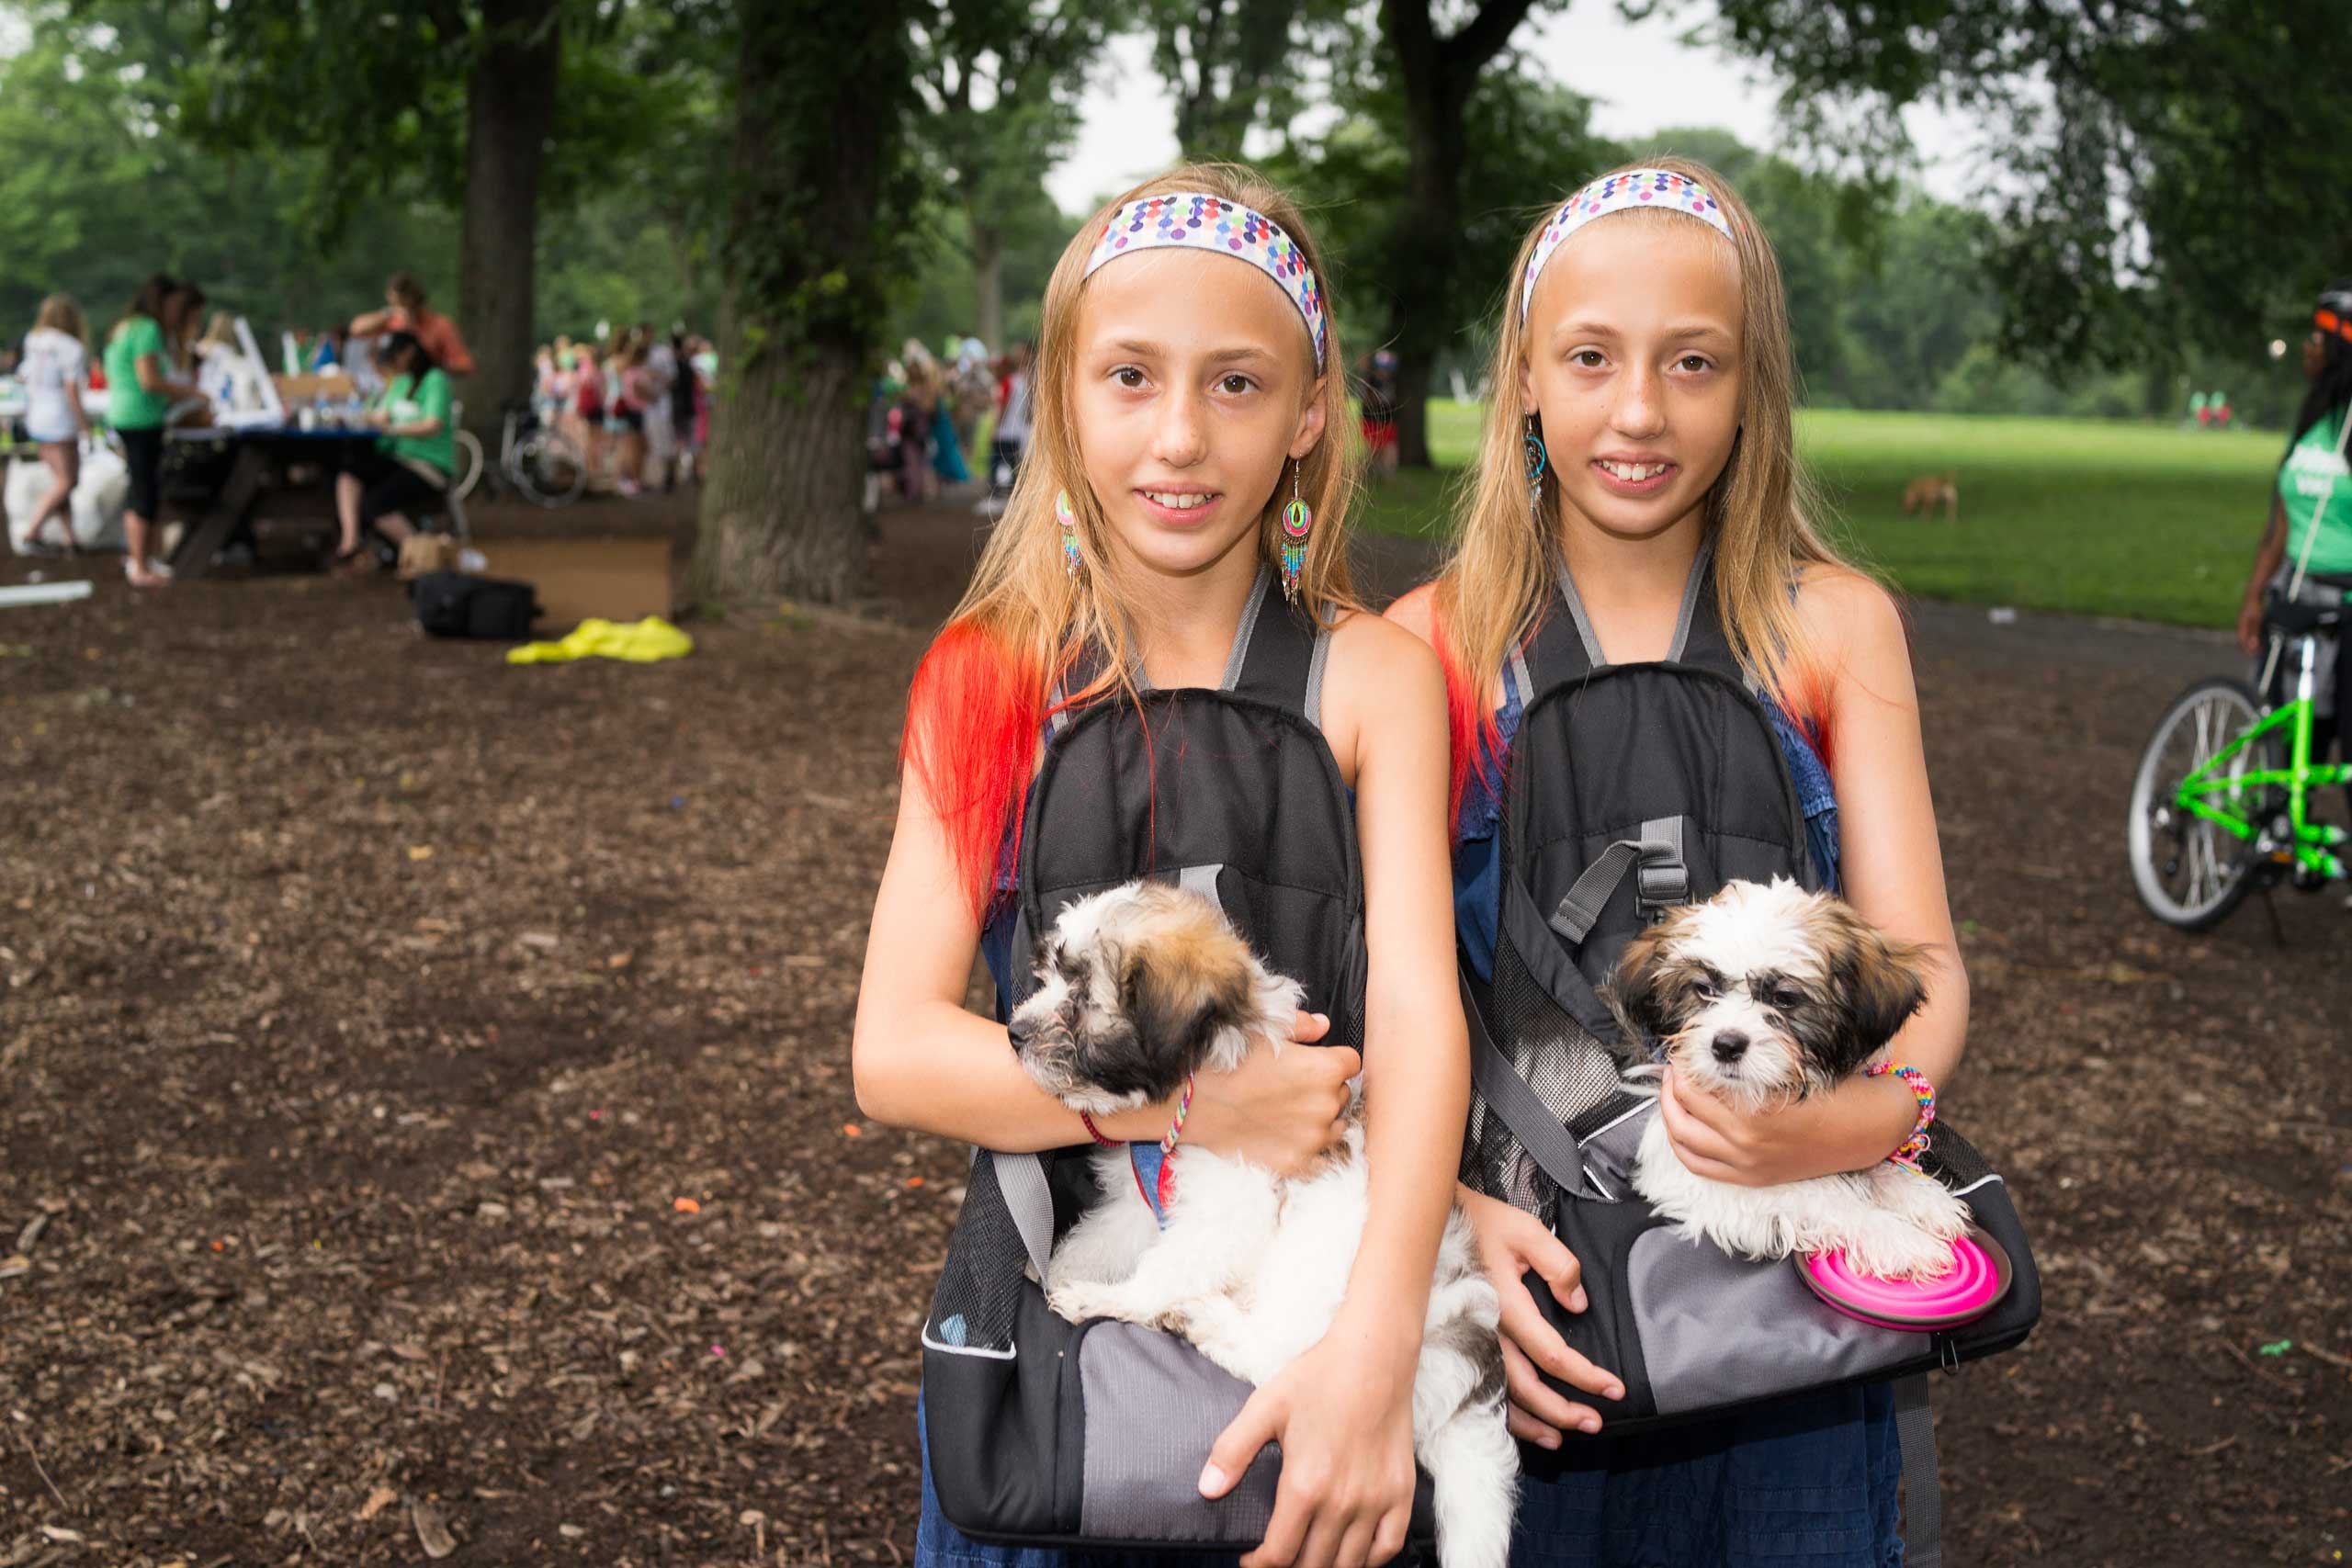 Aryana and Bryonna Kristofsen, both 10, pose for a photograph before hundreds of twins ride tandem bikes in an attempt to set the record for the most twins ever riding tandem bikes, in Central Park in New York City on July 15, 2015.